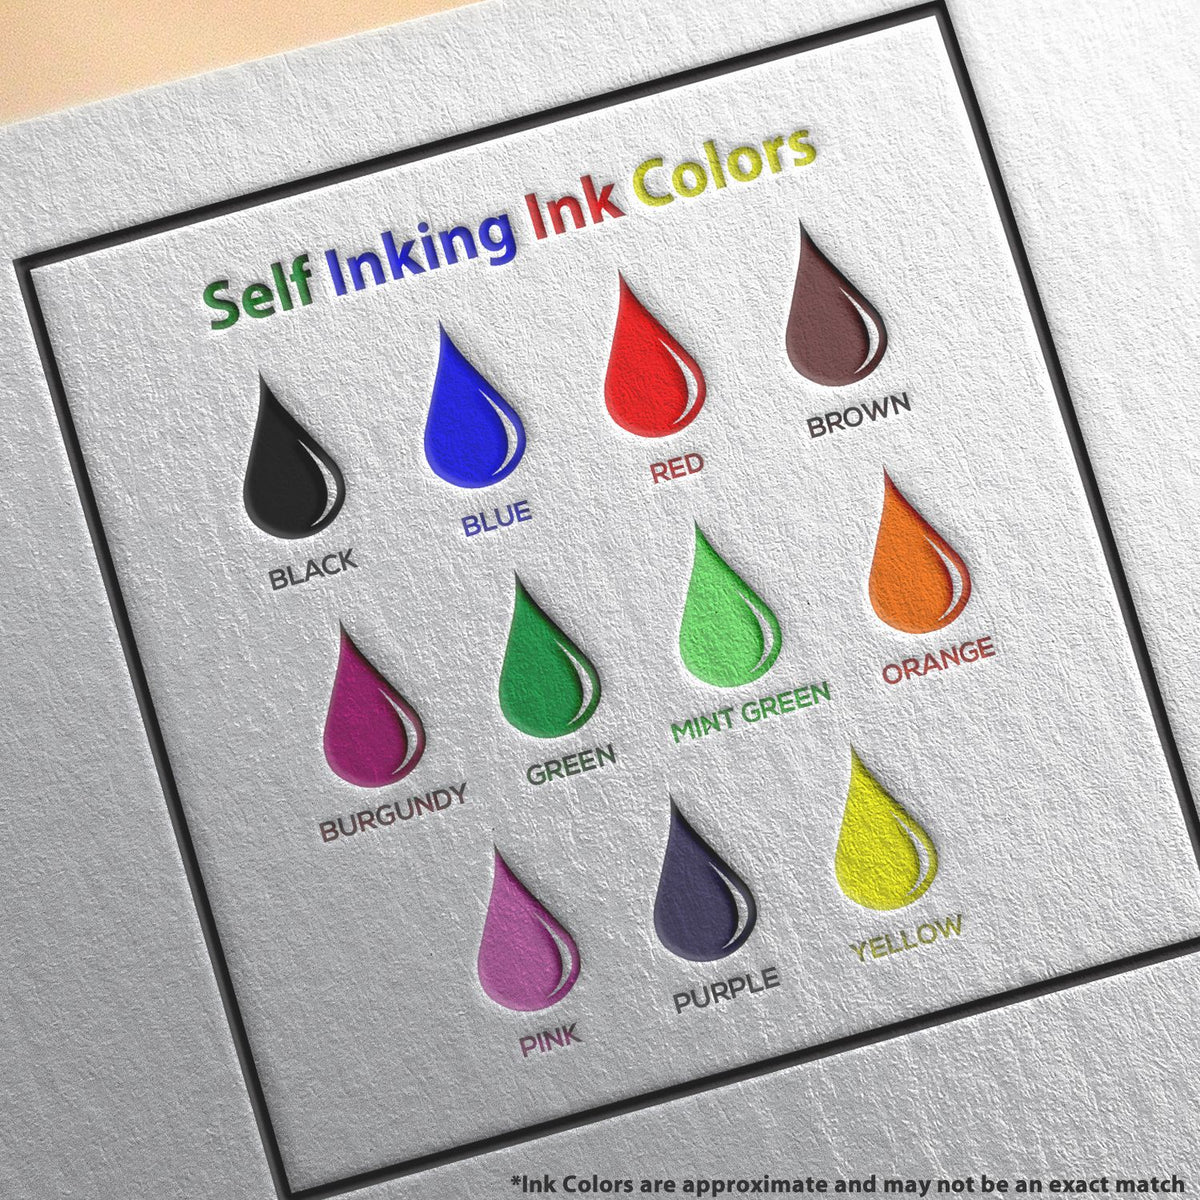 A picture showing the different ink colors or hues available for the Heavy-Duty South Dakota Rectangular Notary Stamp product.